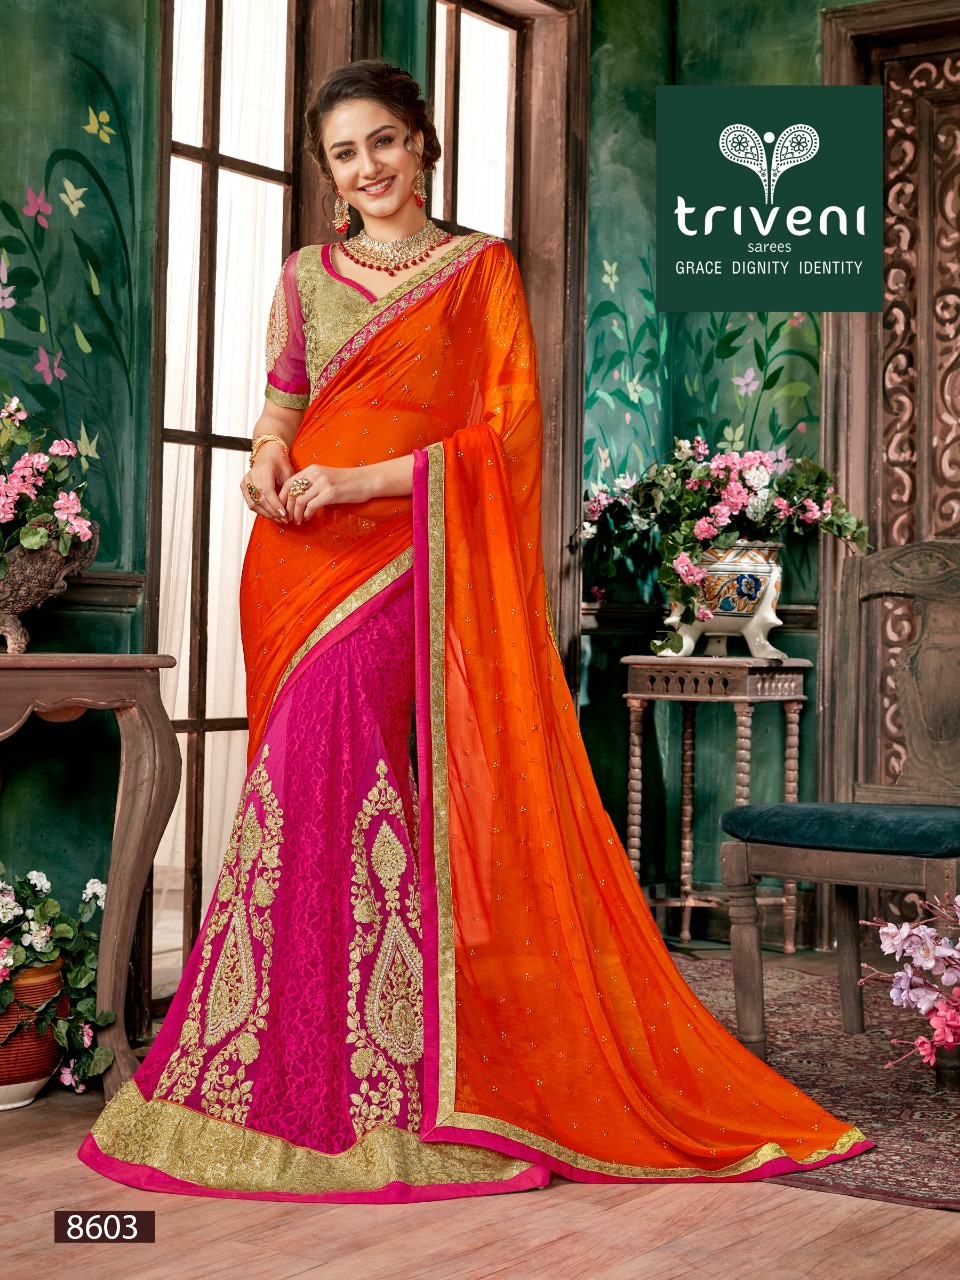 triveni devanshi colorful fancy collection of sarees at reasonable rate